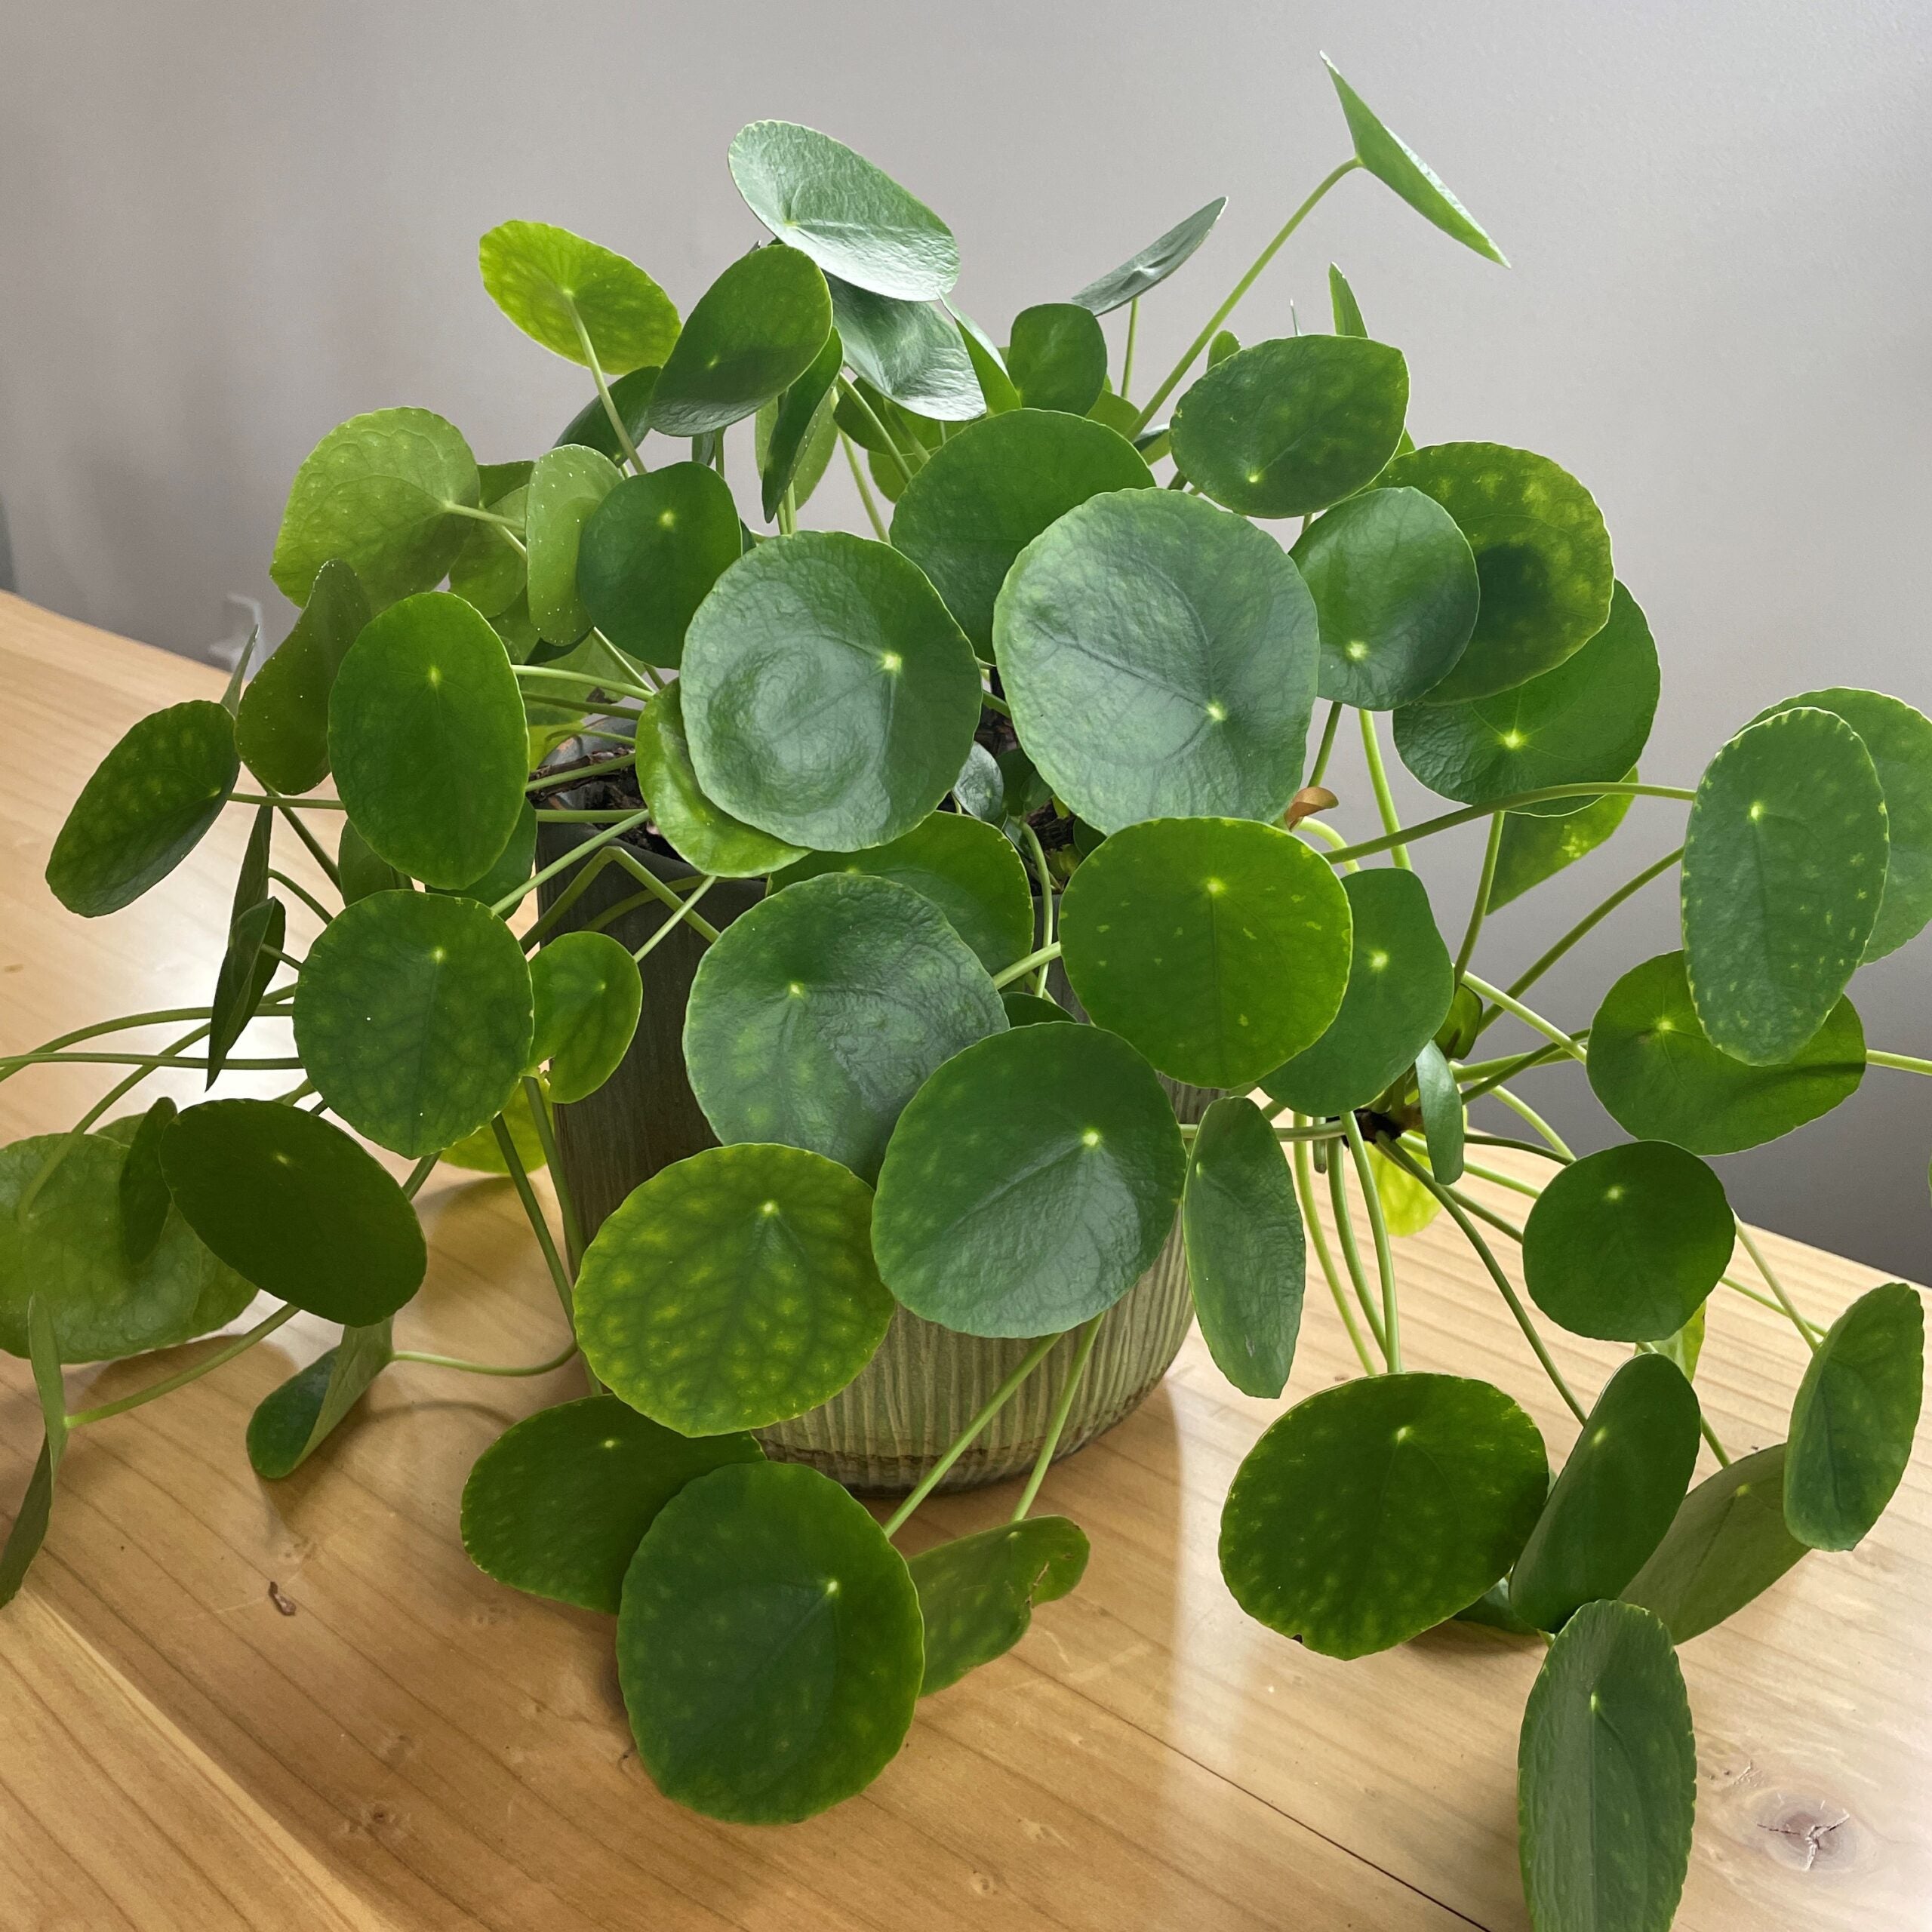 Pilea Peperomioides ‘Chinese Money Plant’ Care Guide